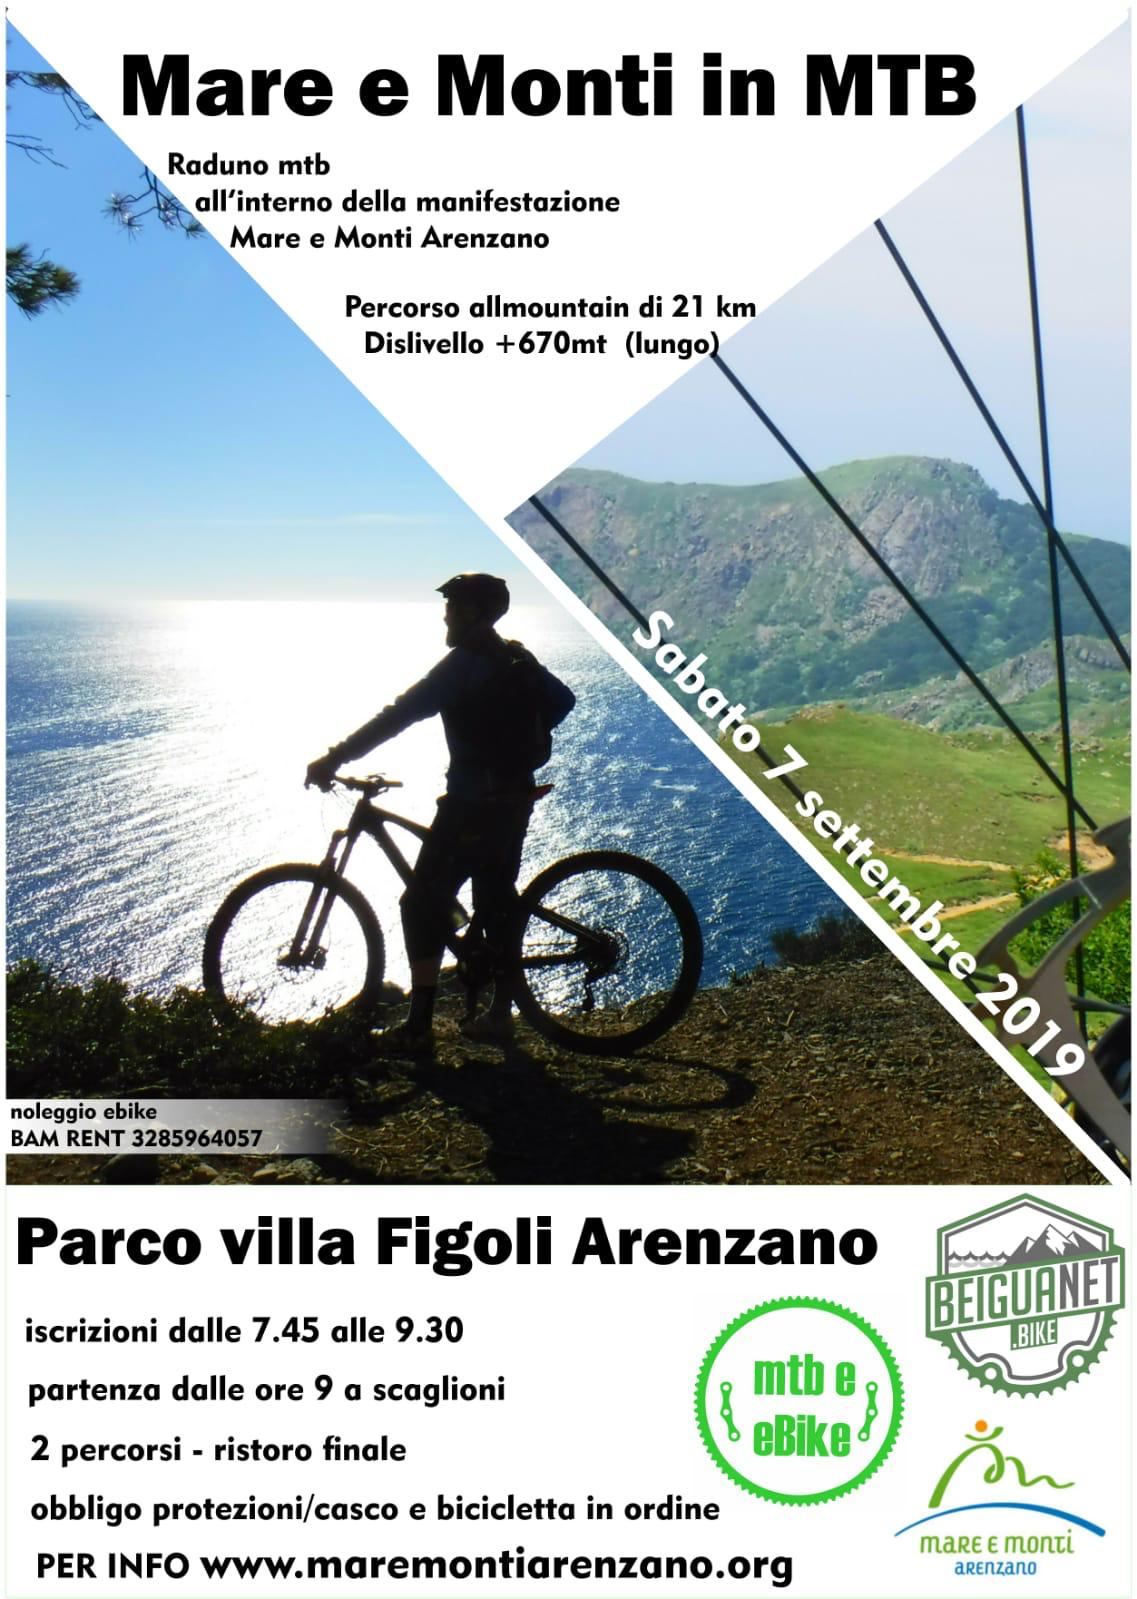 You are currently viewing Mare e Monti Arenzano in MTB